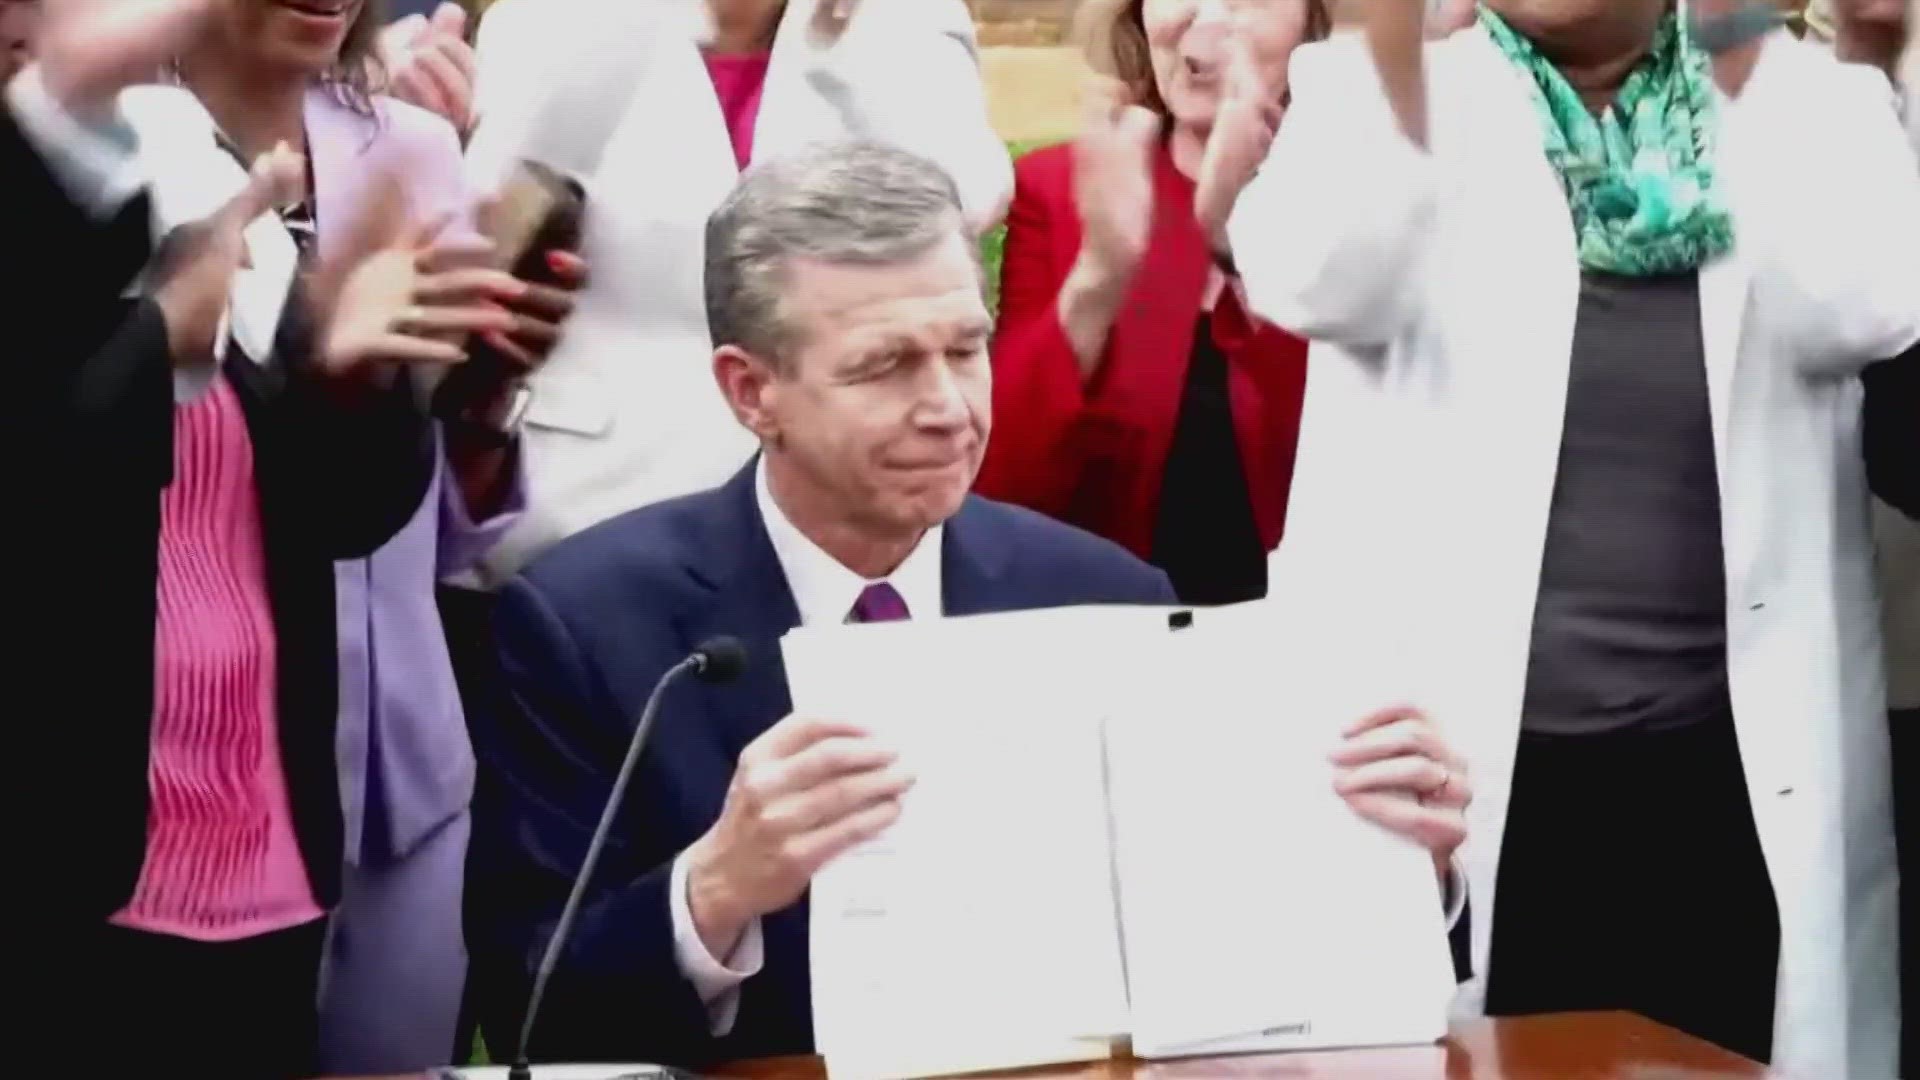 Governor Roy Cooper signed Medicaid expansion into law Monday, so now more than 600,000 North Carolinians will be eligible for health care coverage.